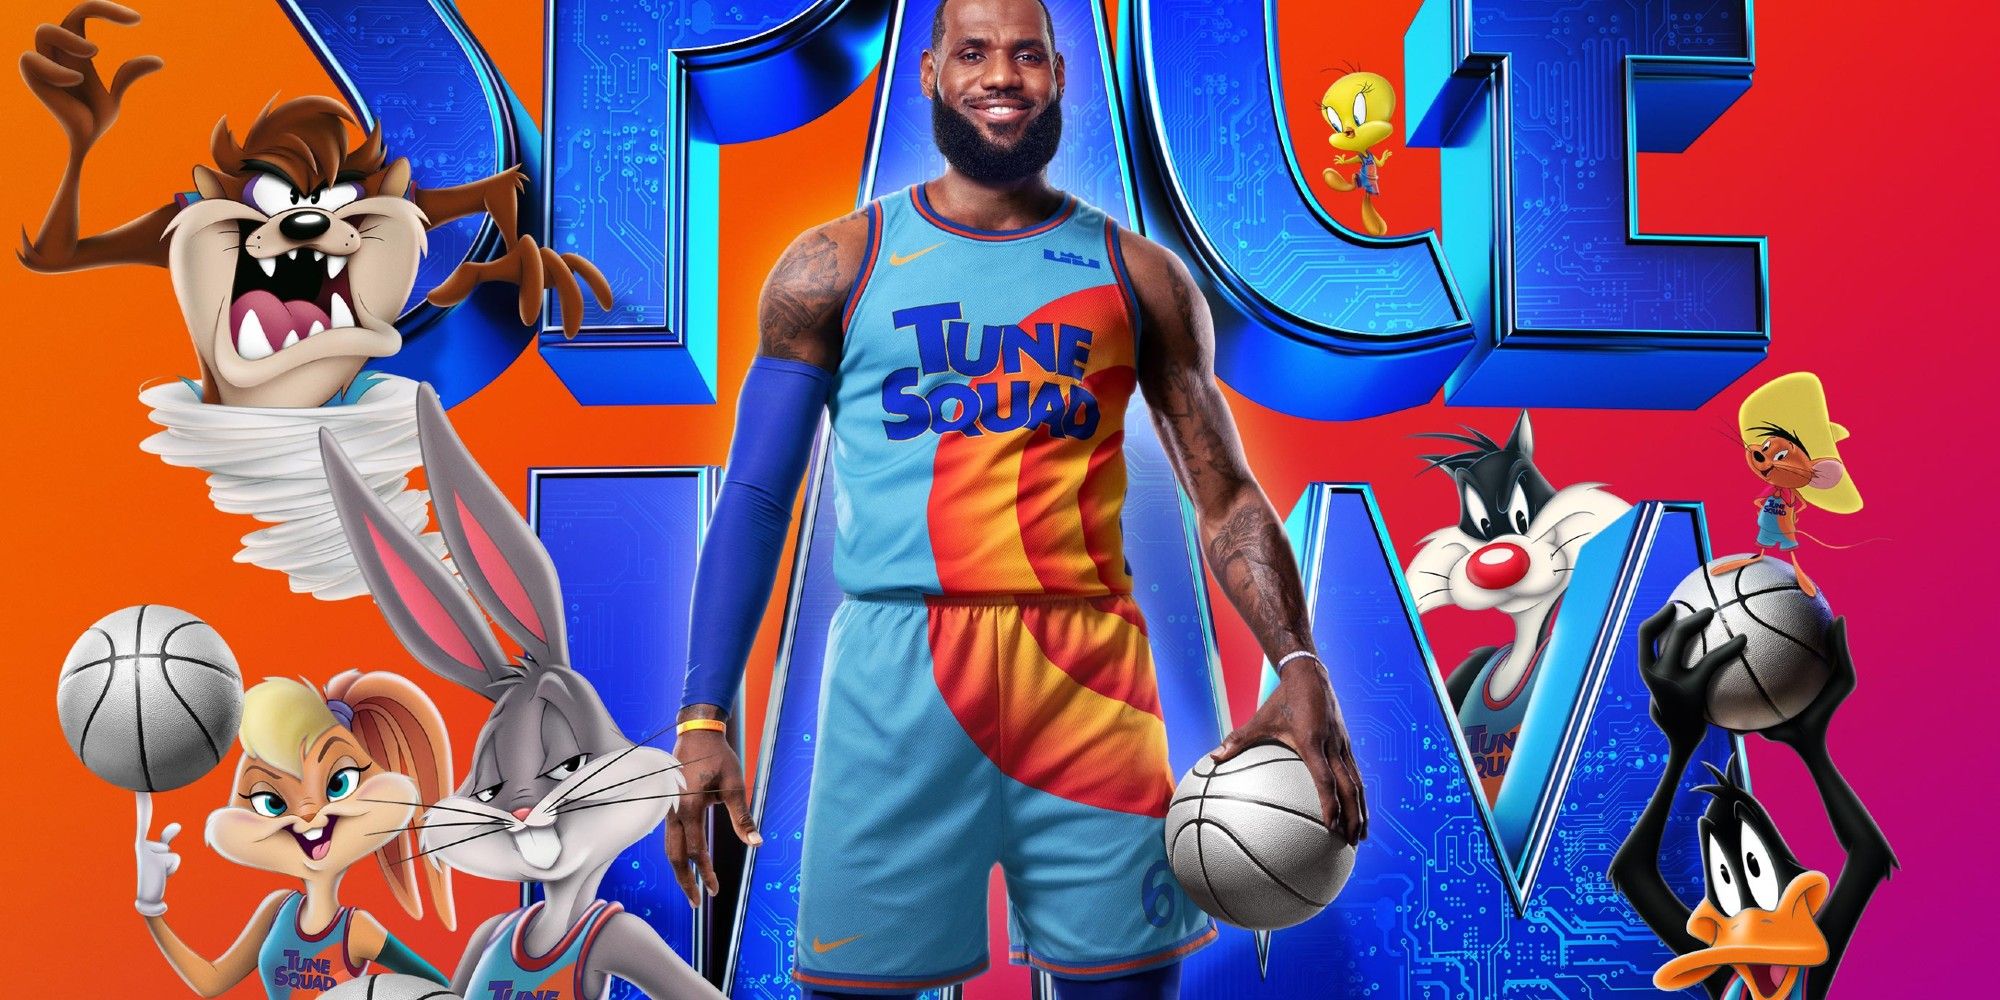 Space Jam: A New Legacy, Tune Squad 1996 at Tune Squad 2021